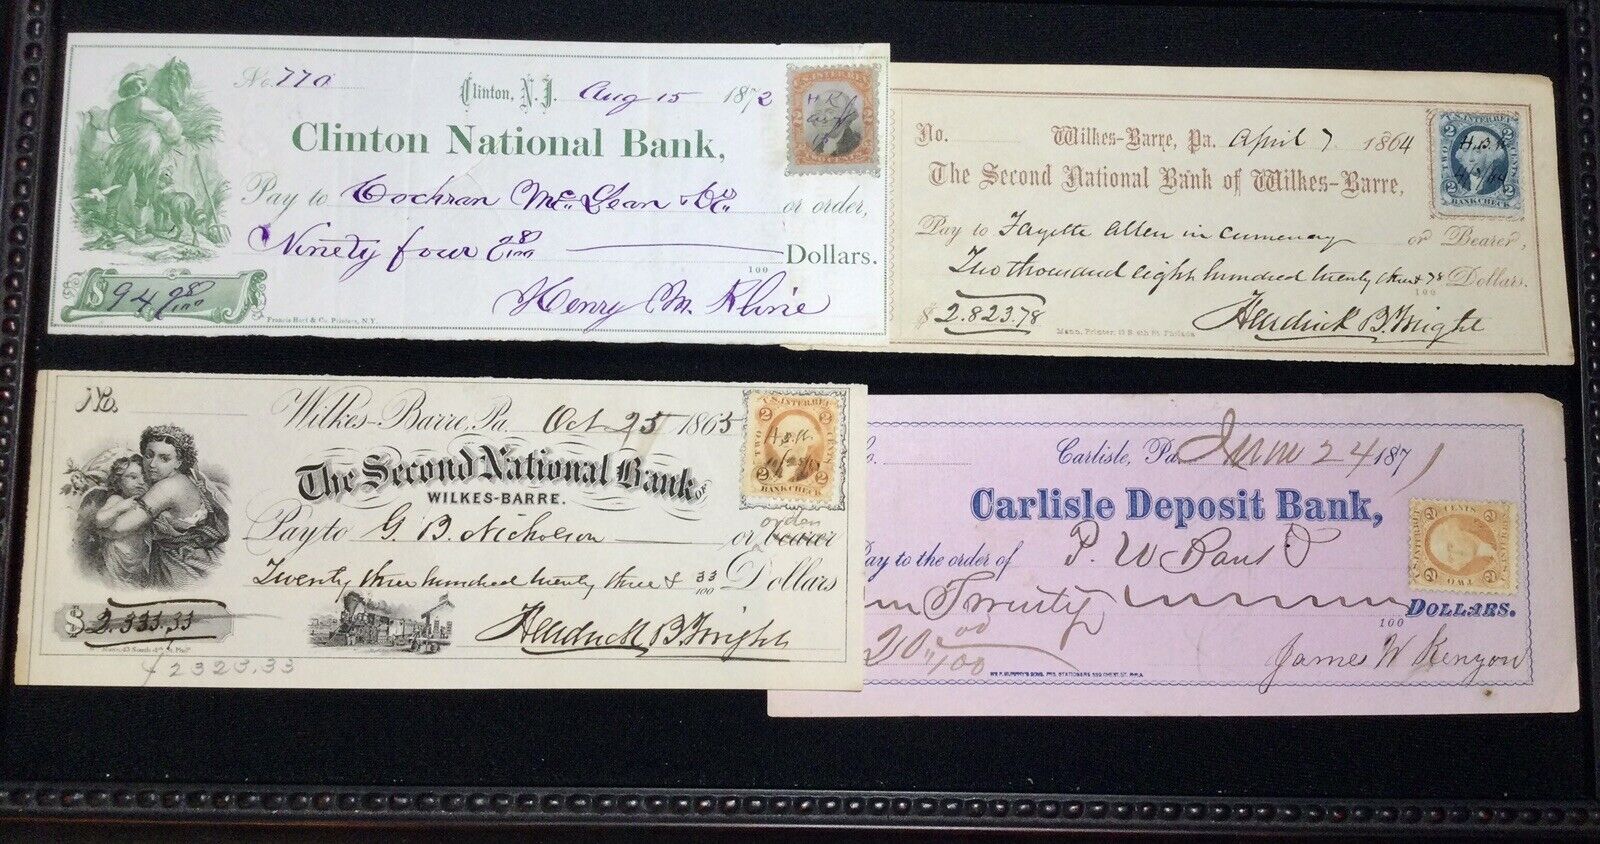 4 Old Bank Check Receipts Used w/ Revenue Stamps - 1864, 1865, 1871, 1872 NJ PA